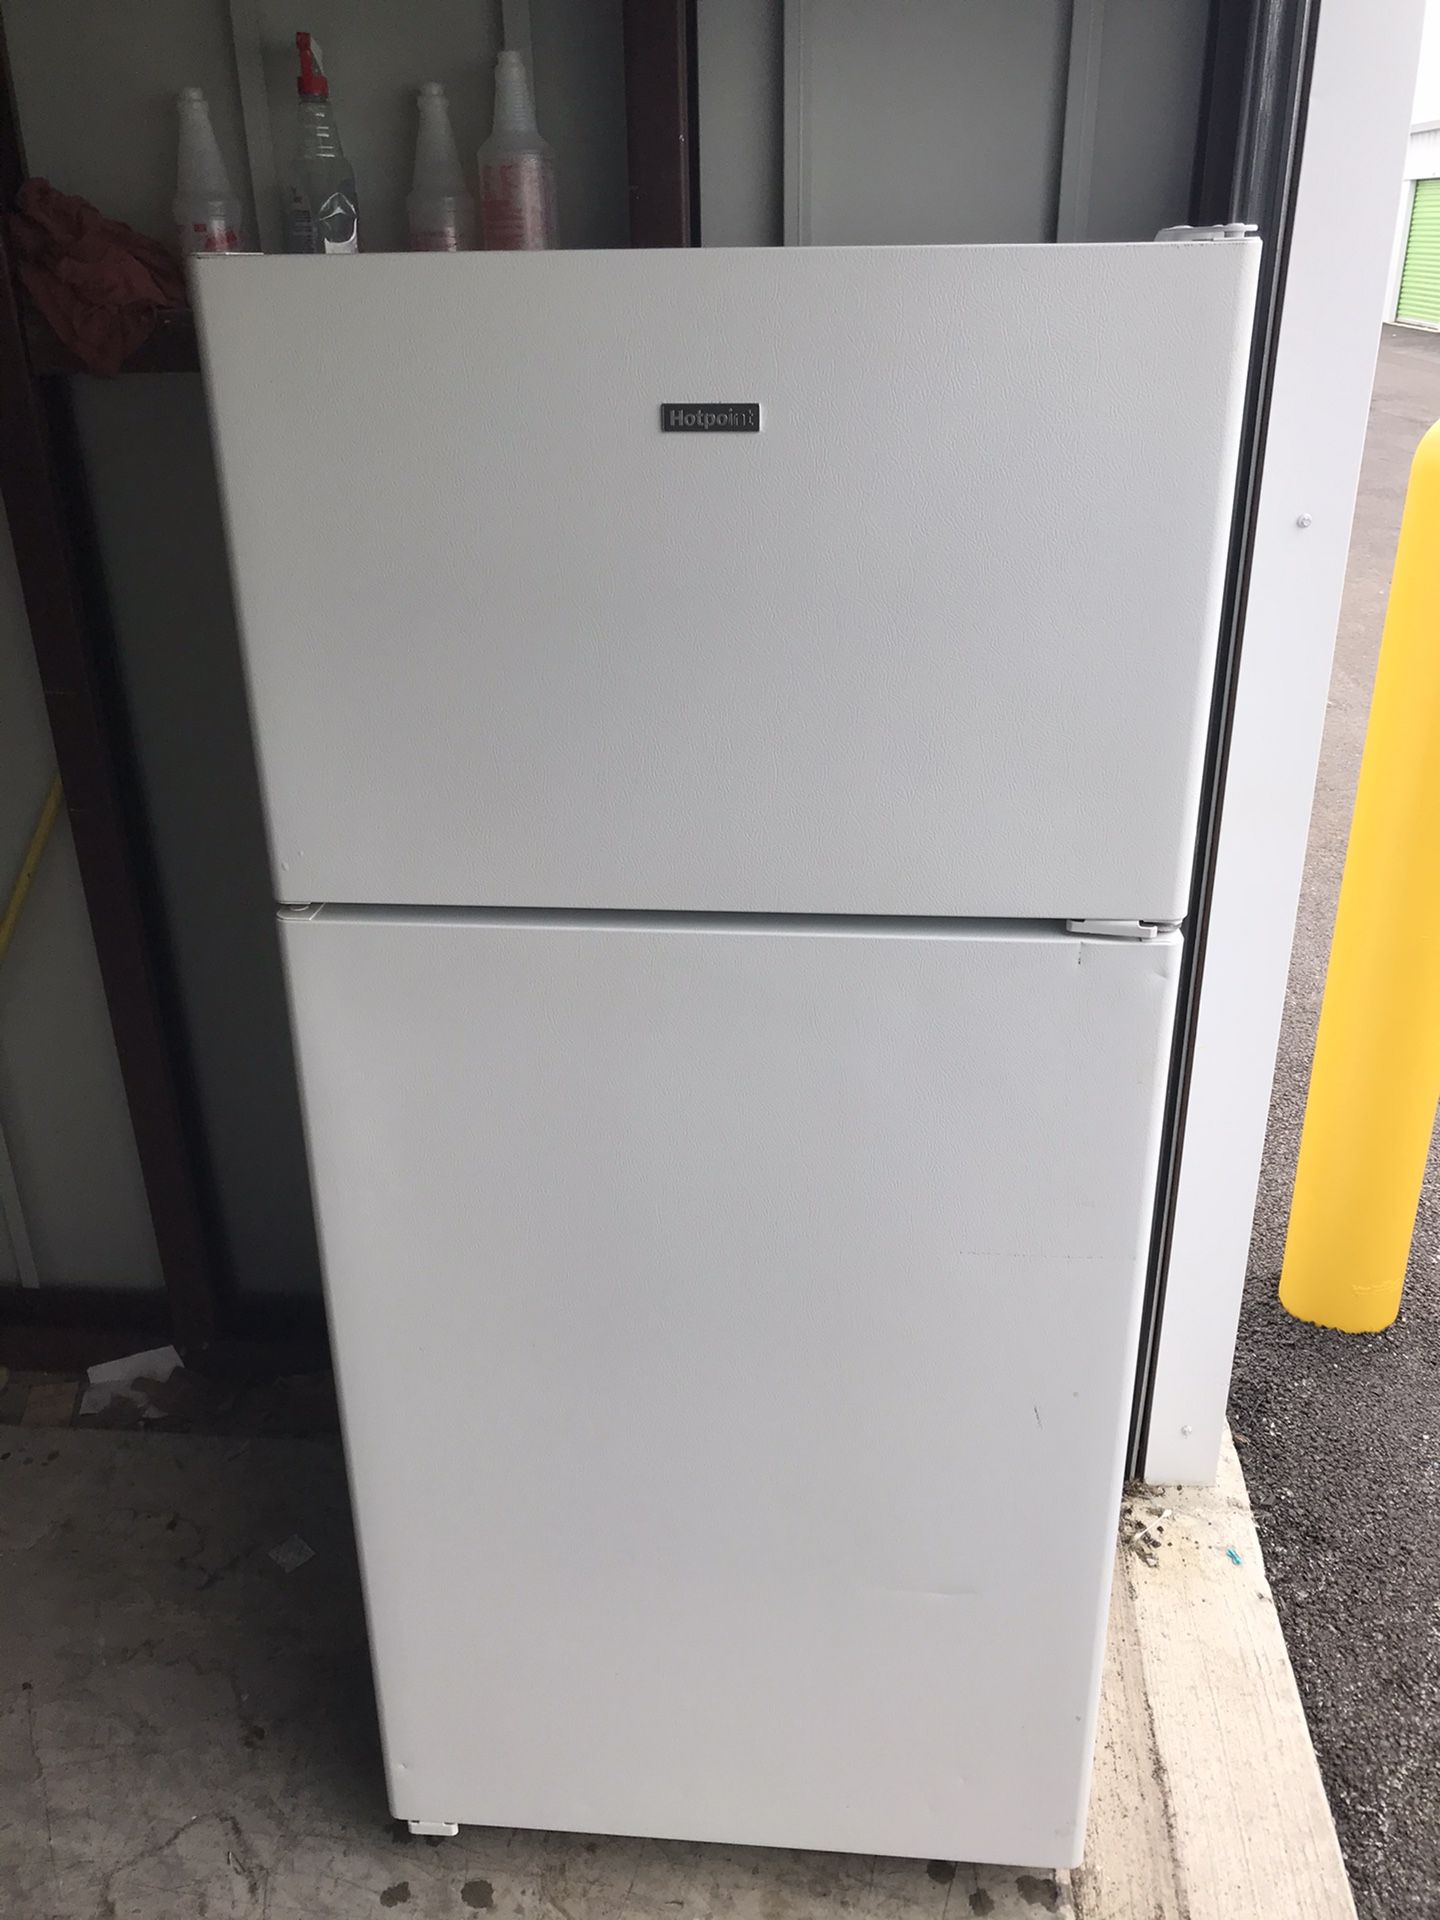 Hotpoint Refrigerator 15 cubic ft